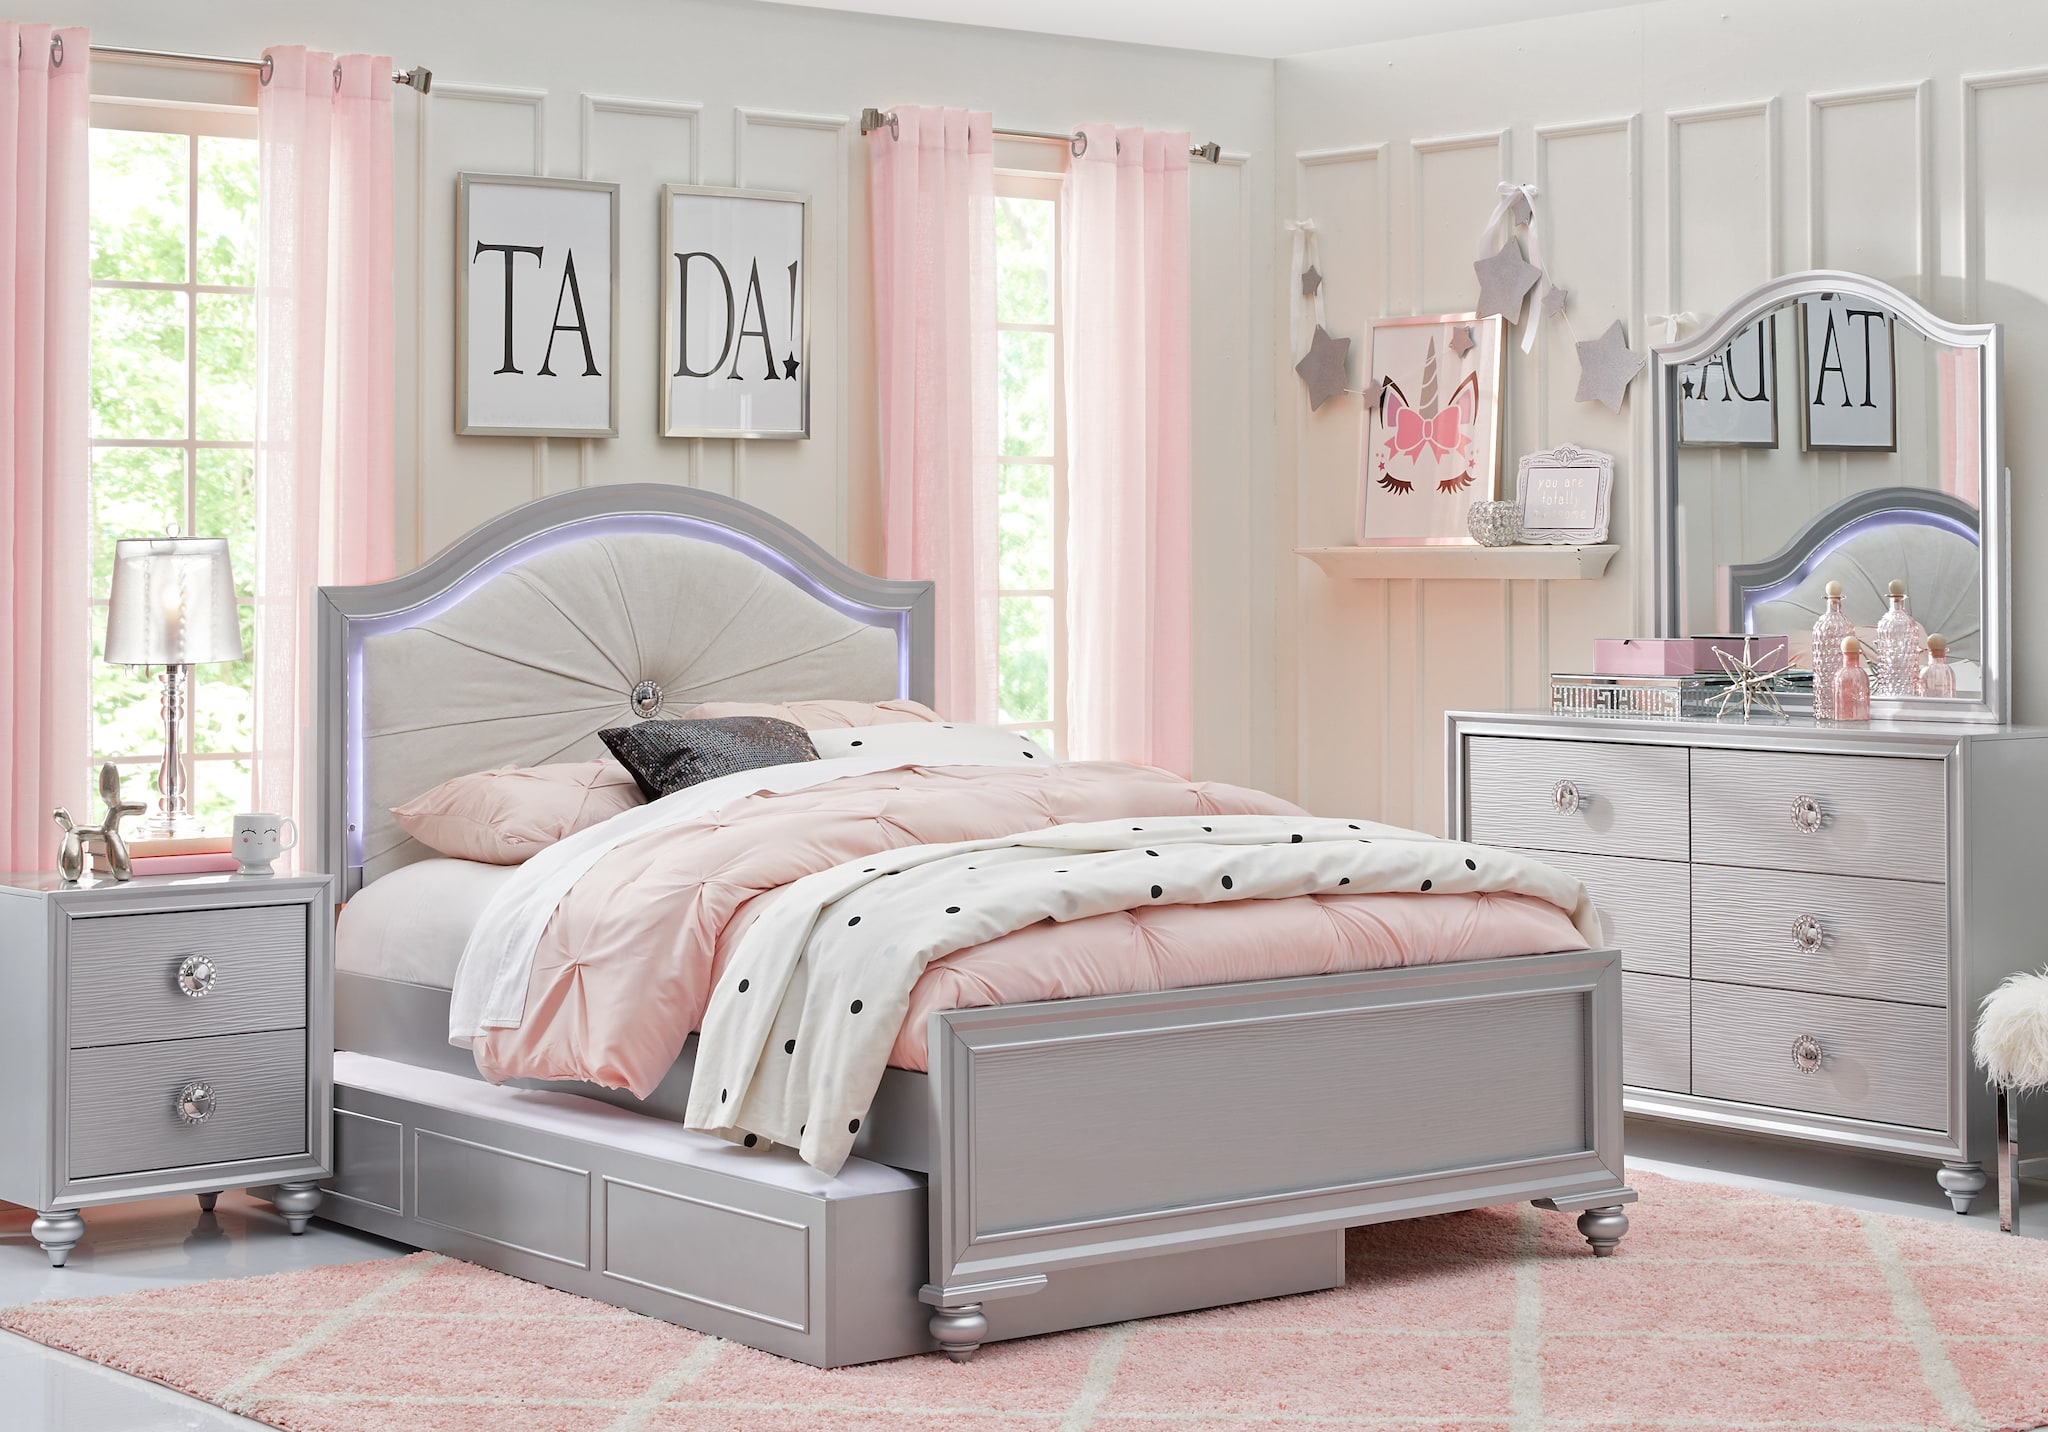 Girls Bedroom Sets Suitable Combine With Bedroom Sets For Girls with size 2048 X 1432